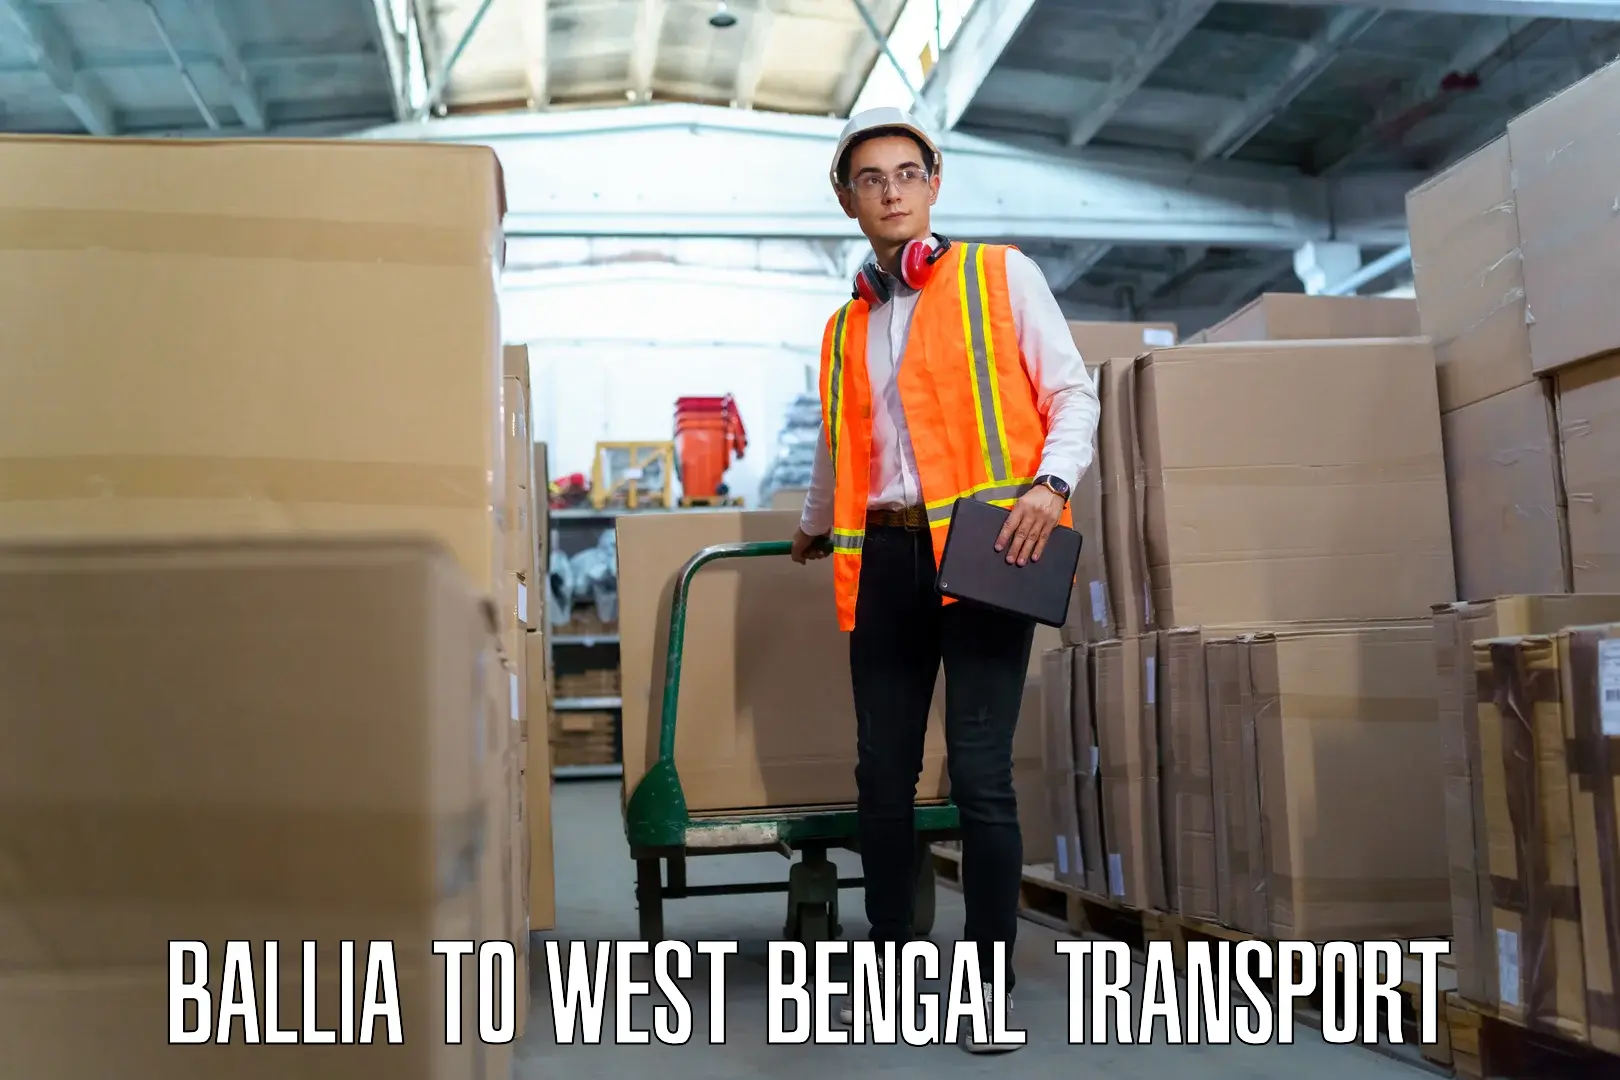 Truck transport companies in India Ballia to West Bengal